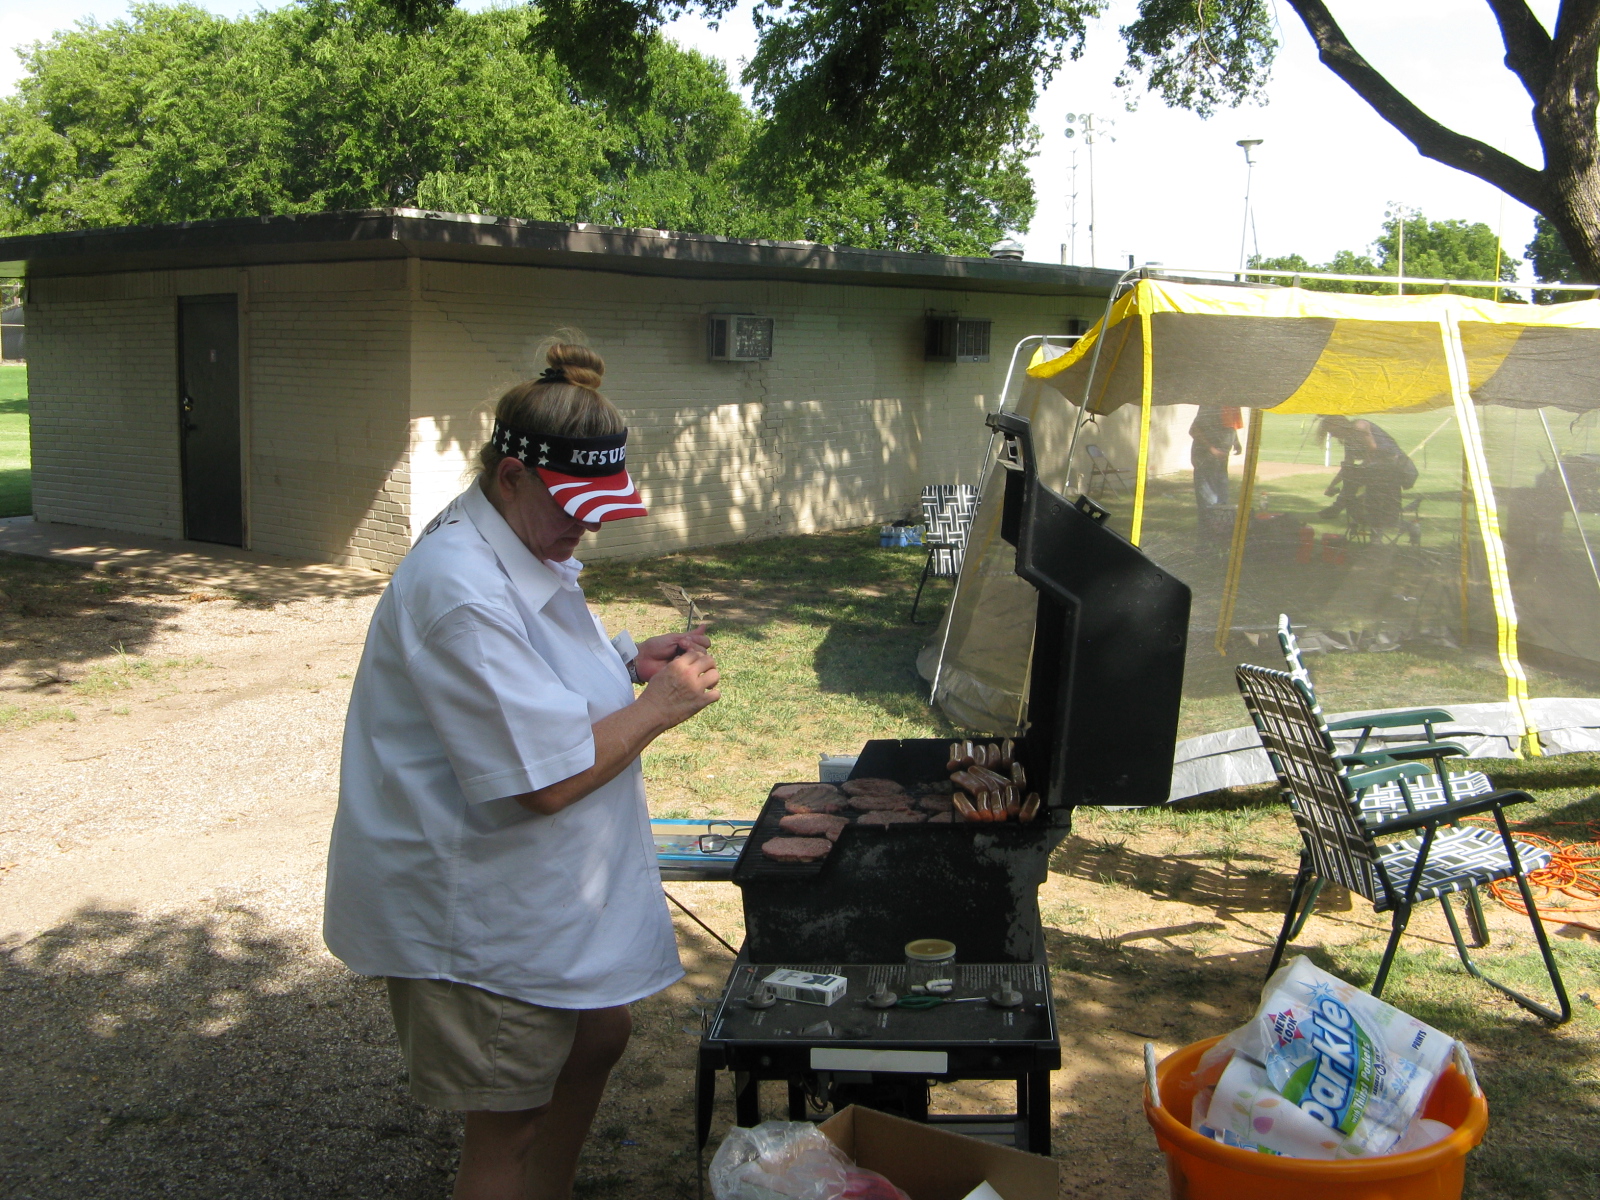 Kathy cooking burgers and dogs